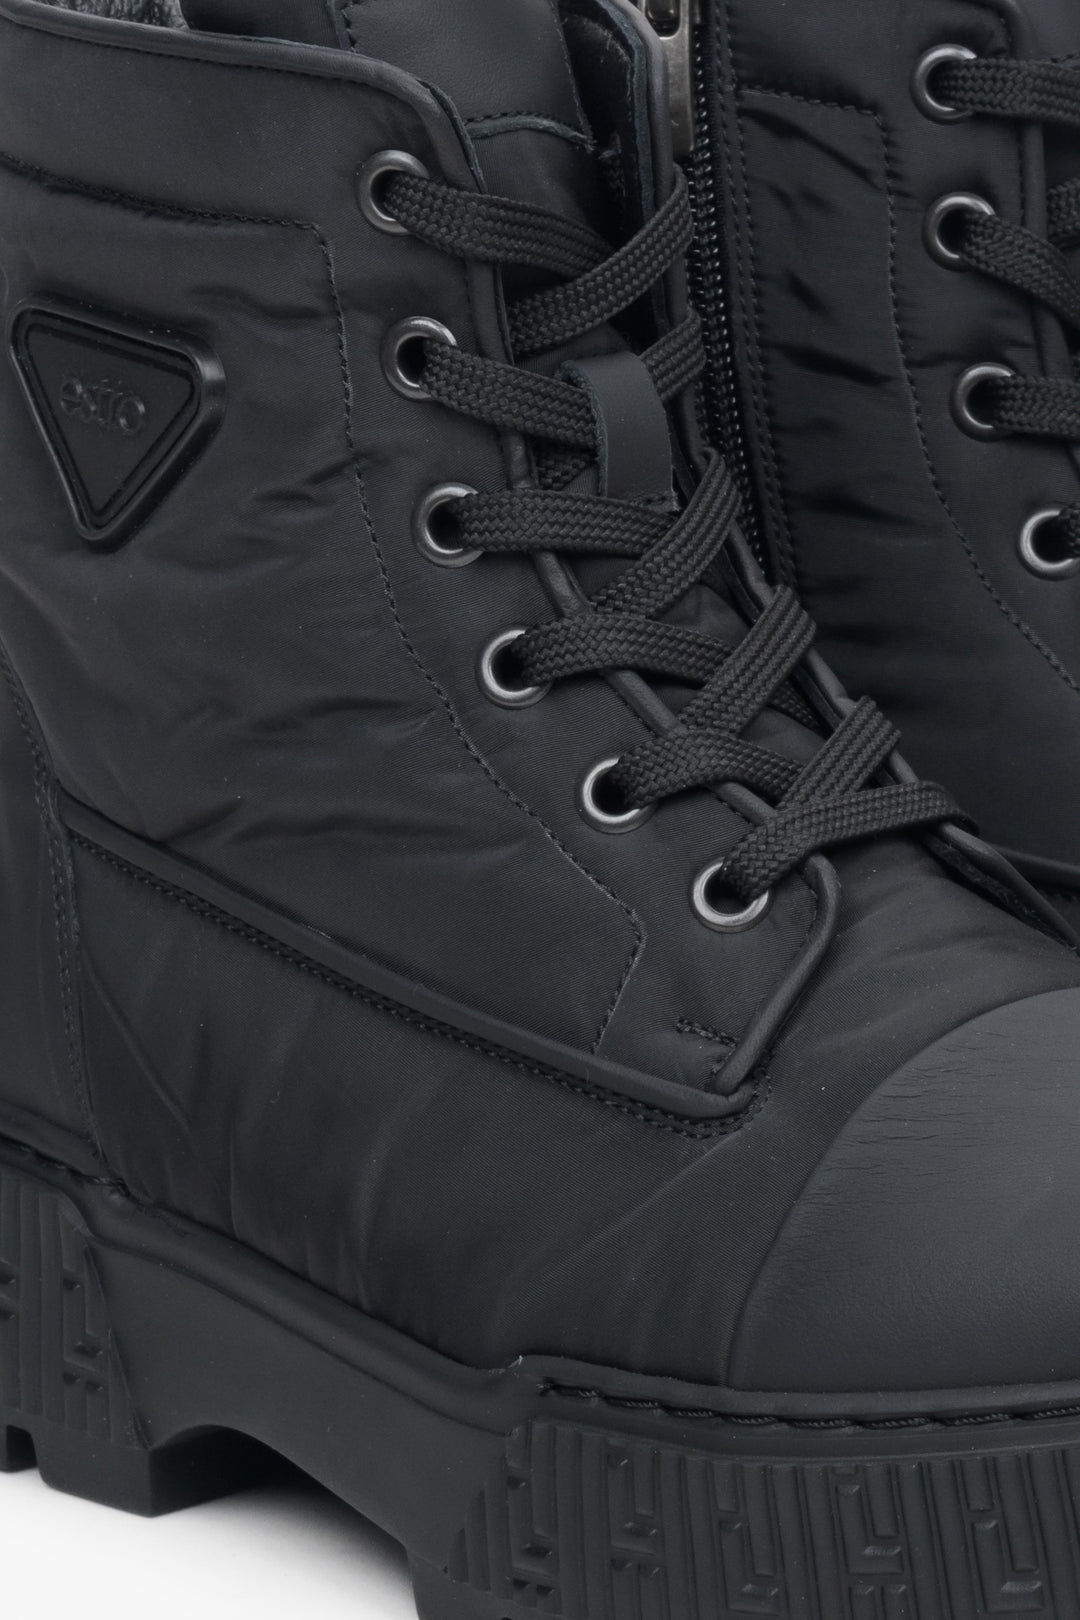 Comfortable women's black  autumn boots by Estro - close-up on the lacing system.